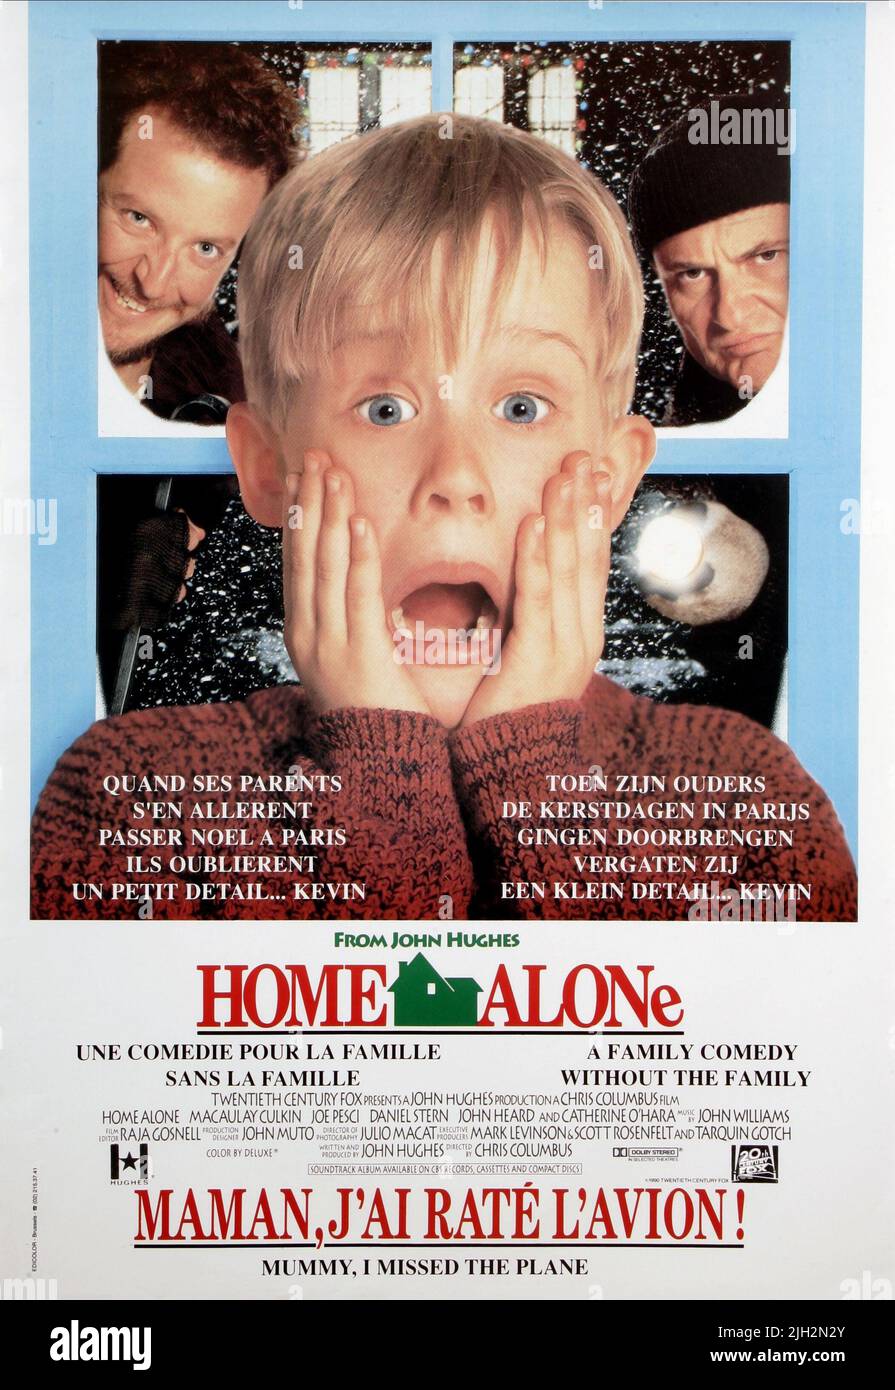 essay about home alone movie